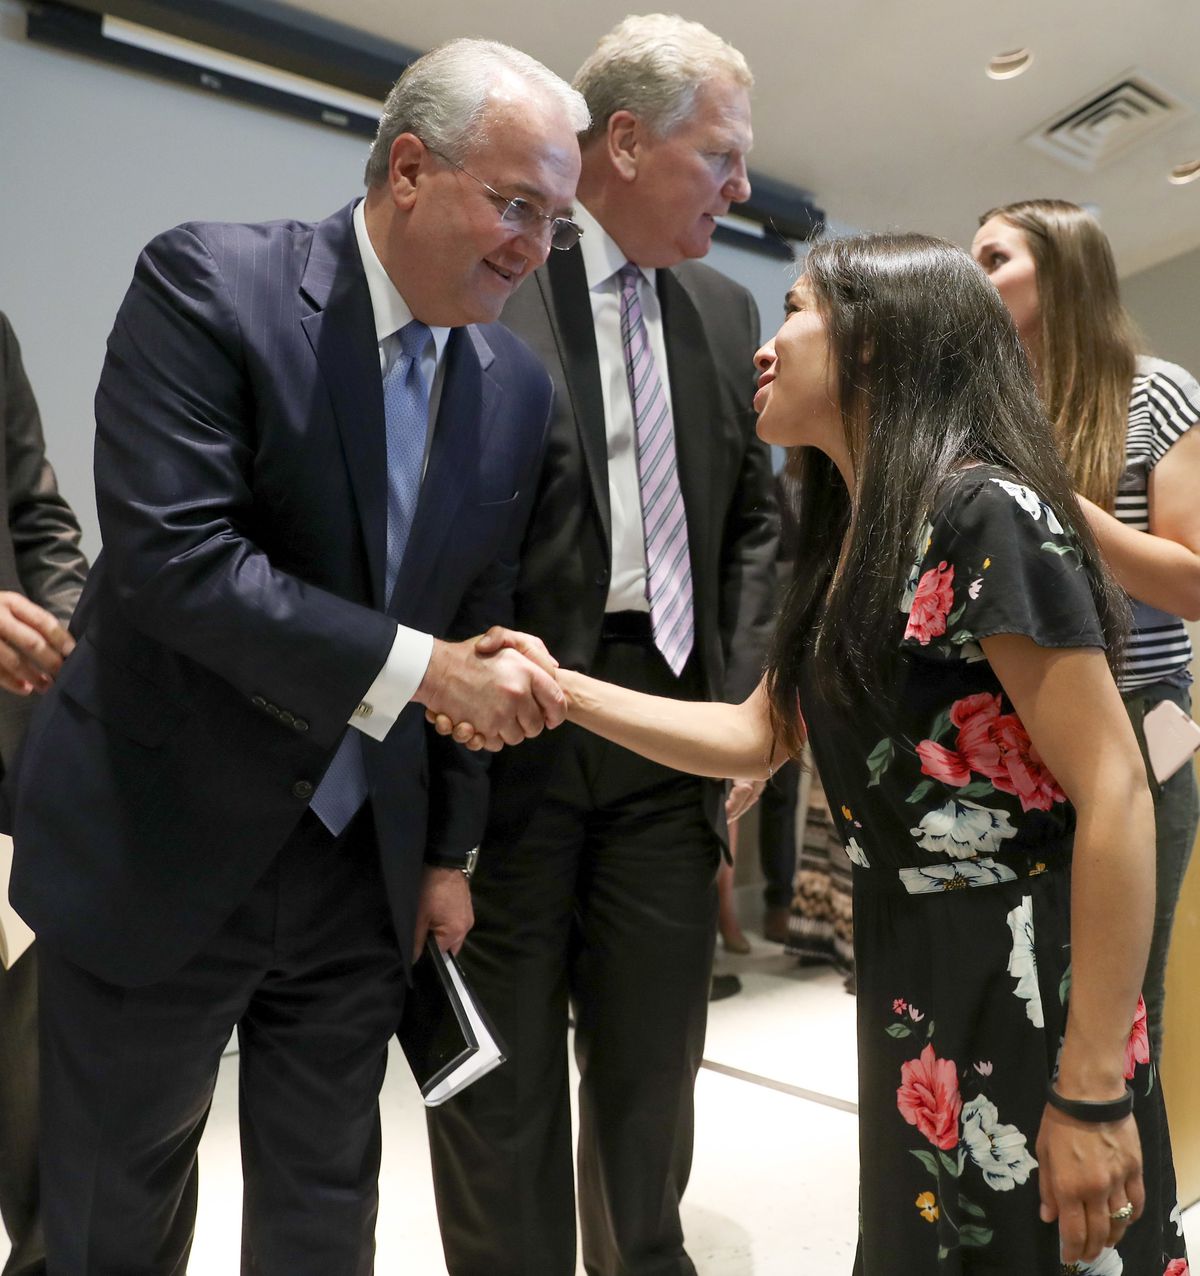 Elder Jack Gerard, a General Authority Seventy of The Church of Jesus Christ of Latter-day Saints, left, shakes hands with Enedina Stanger, a patient representative, after a broad coalition of Utah community leaders announced its opposition to Utah's medi